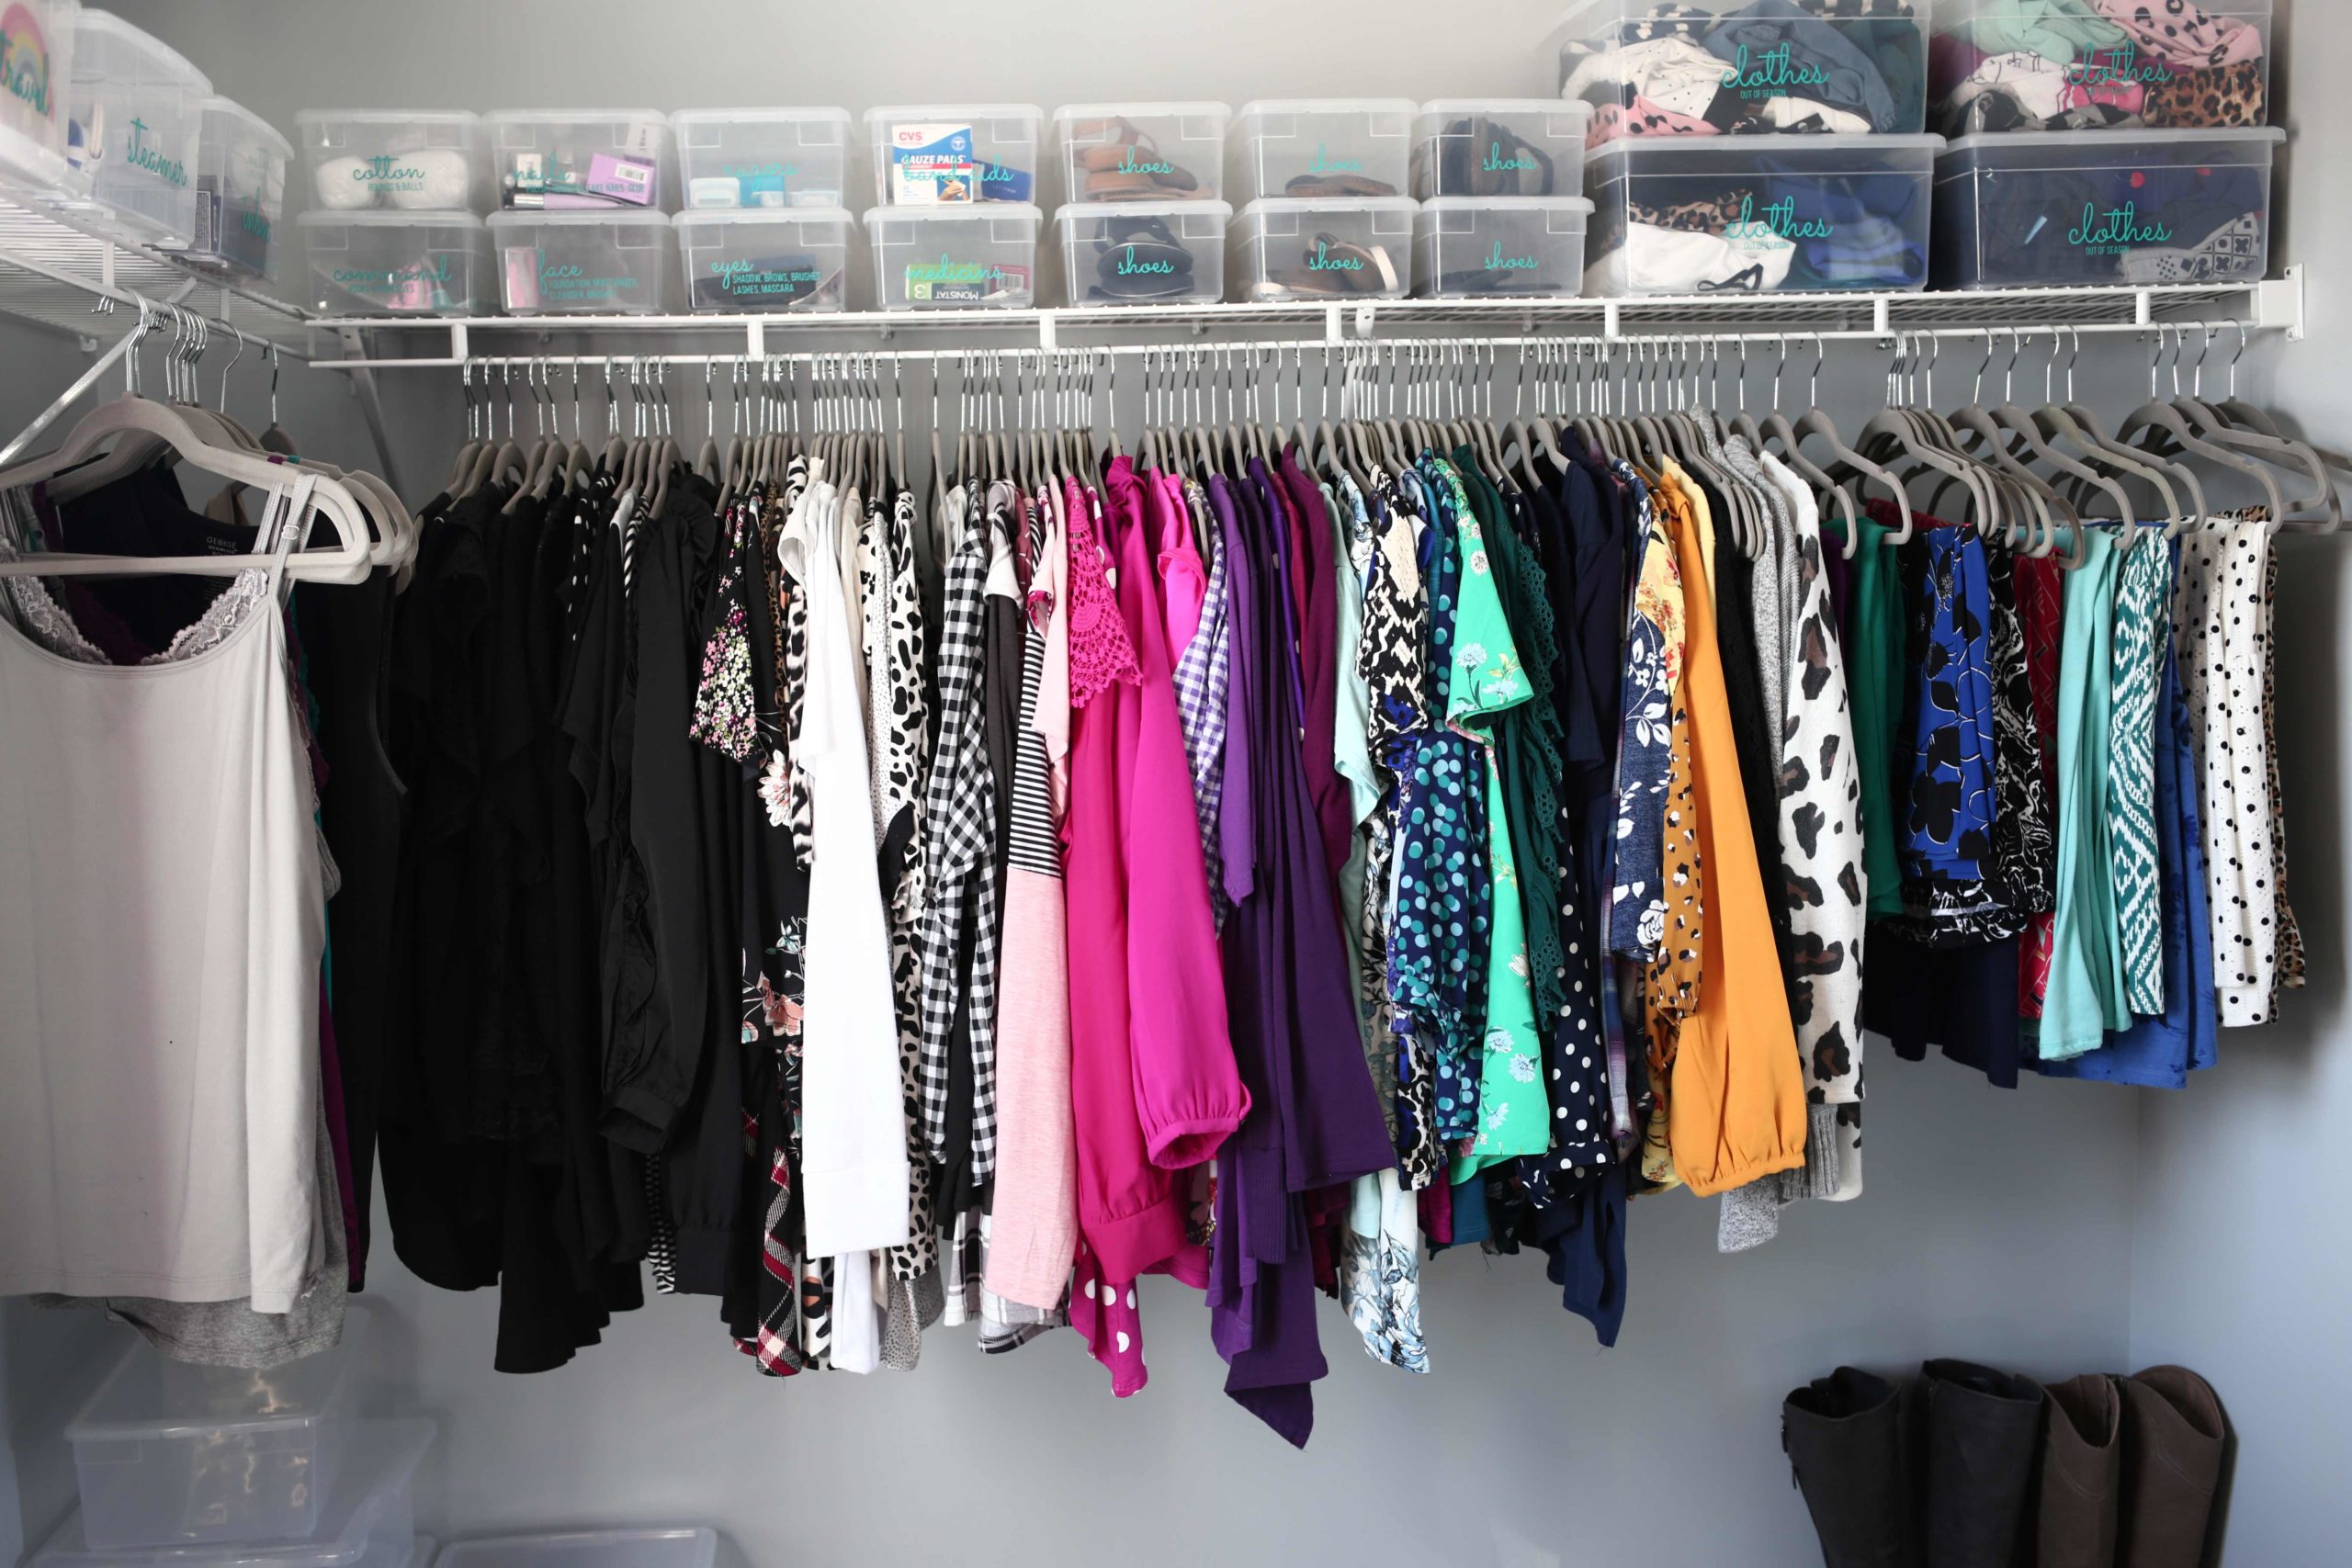 Best Closet Systems for Organizing Your Clothing